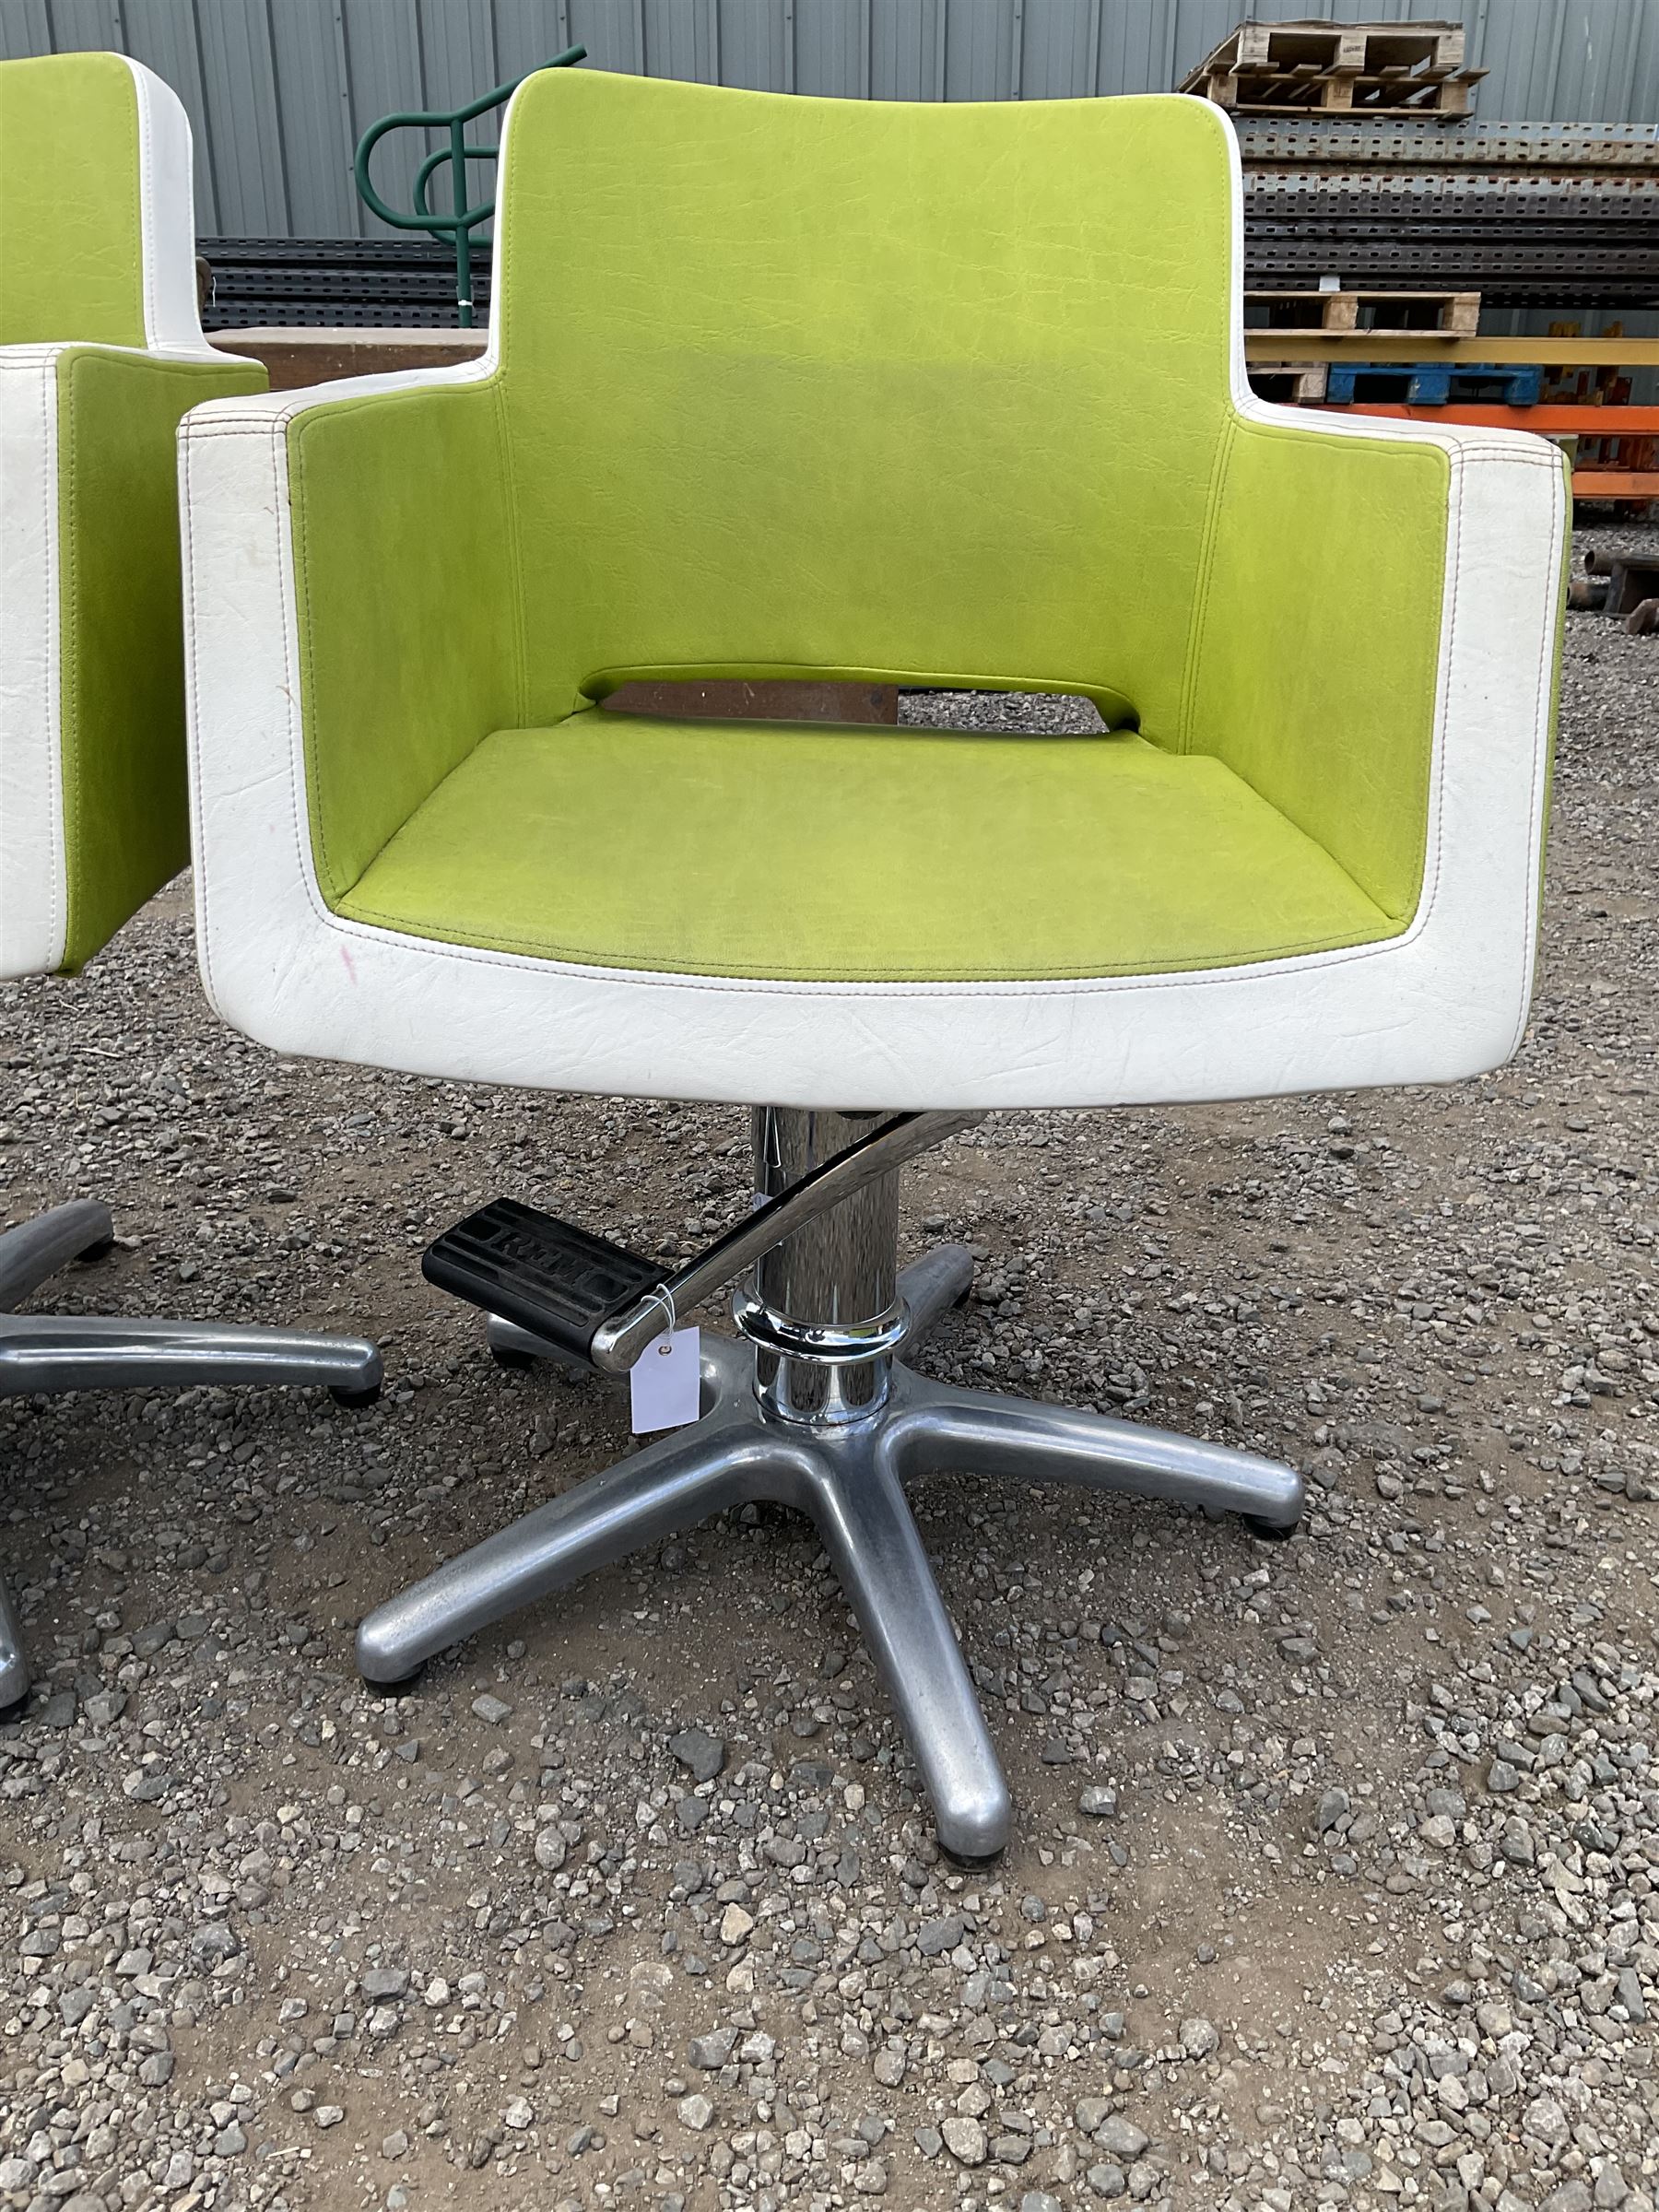 Salon Equipment - Set of four green and white faux leather hydraulic styling salon chairs - THIS LOT - Image 2 of 5